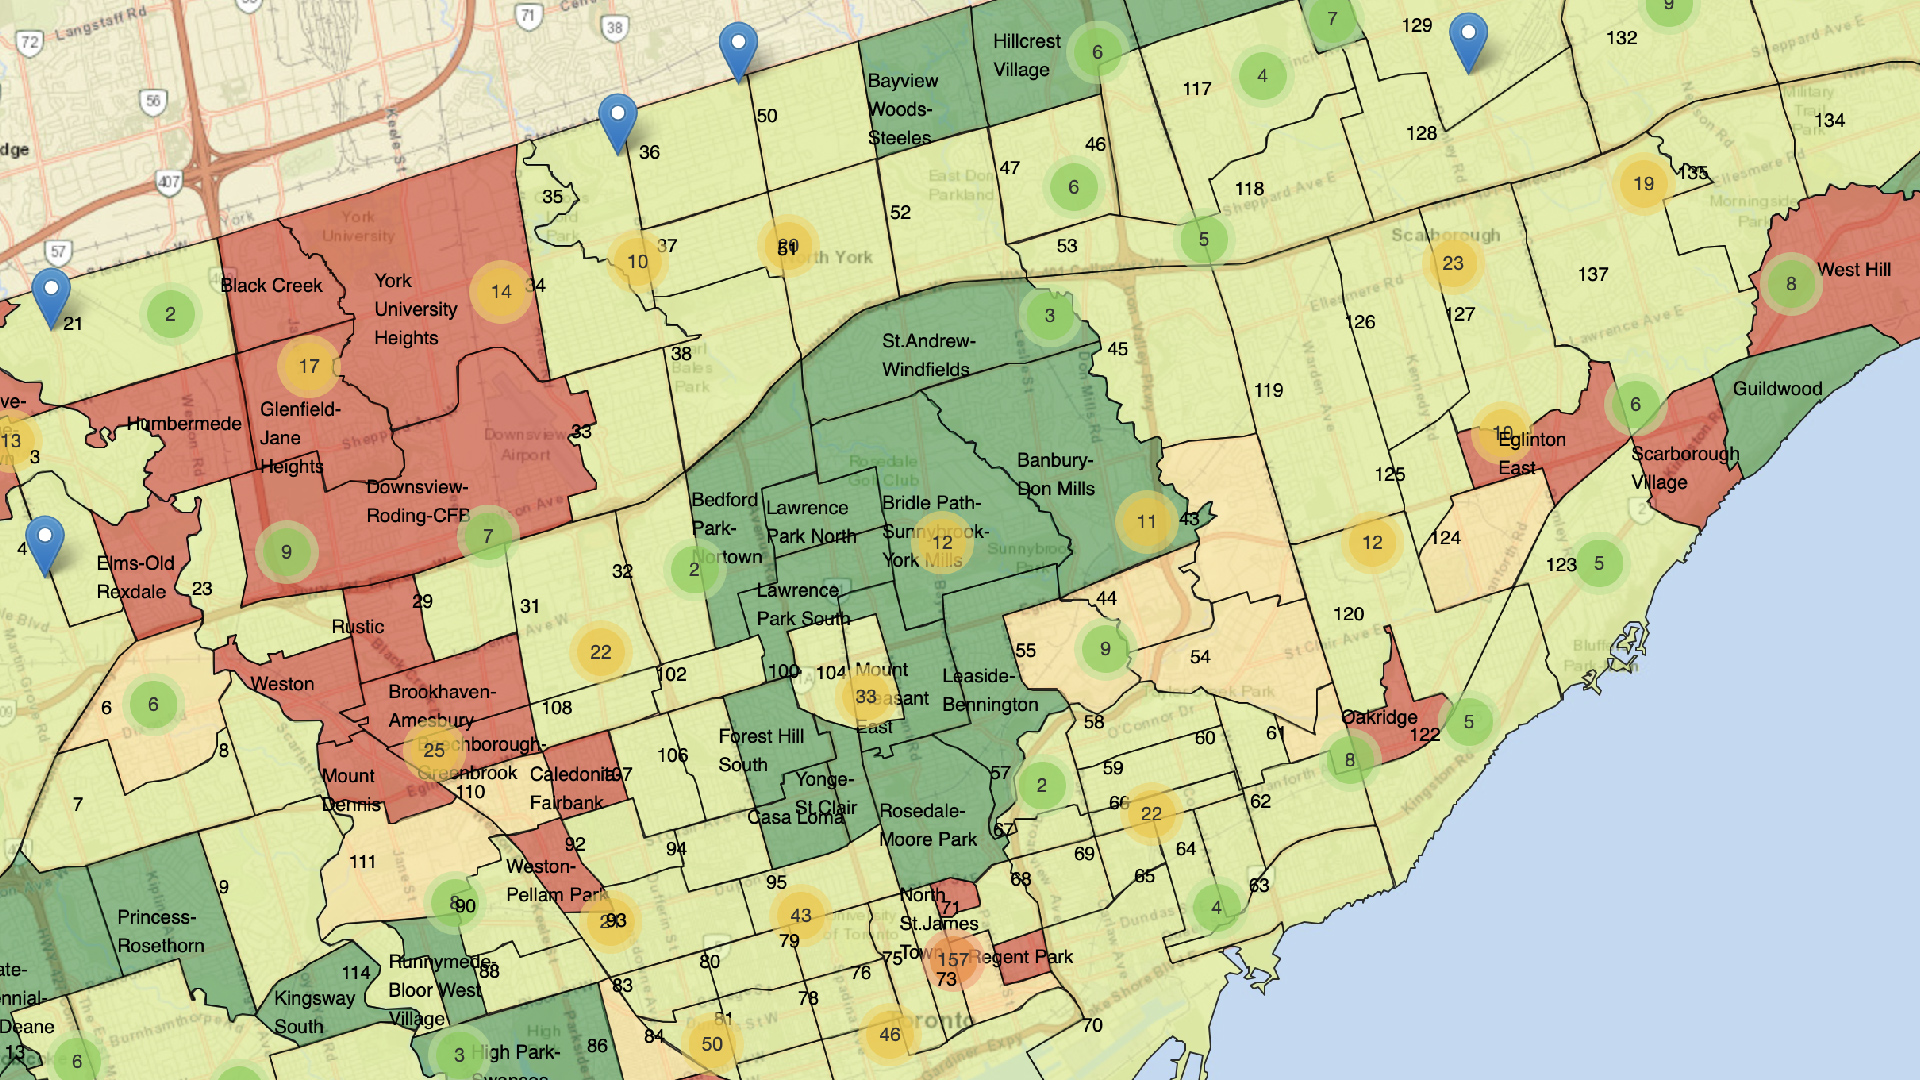 Guest Post: Using Folium to Visualize Distribution of Public Services in 140 Toronto Neighbourhoods